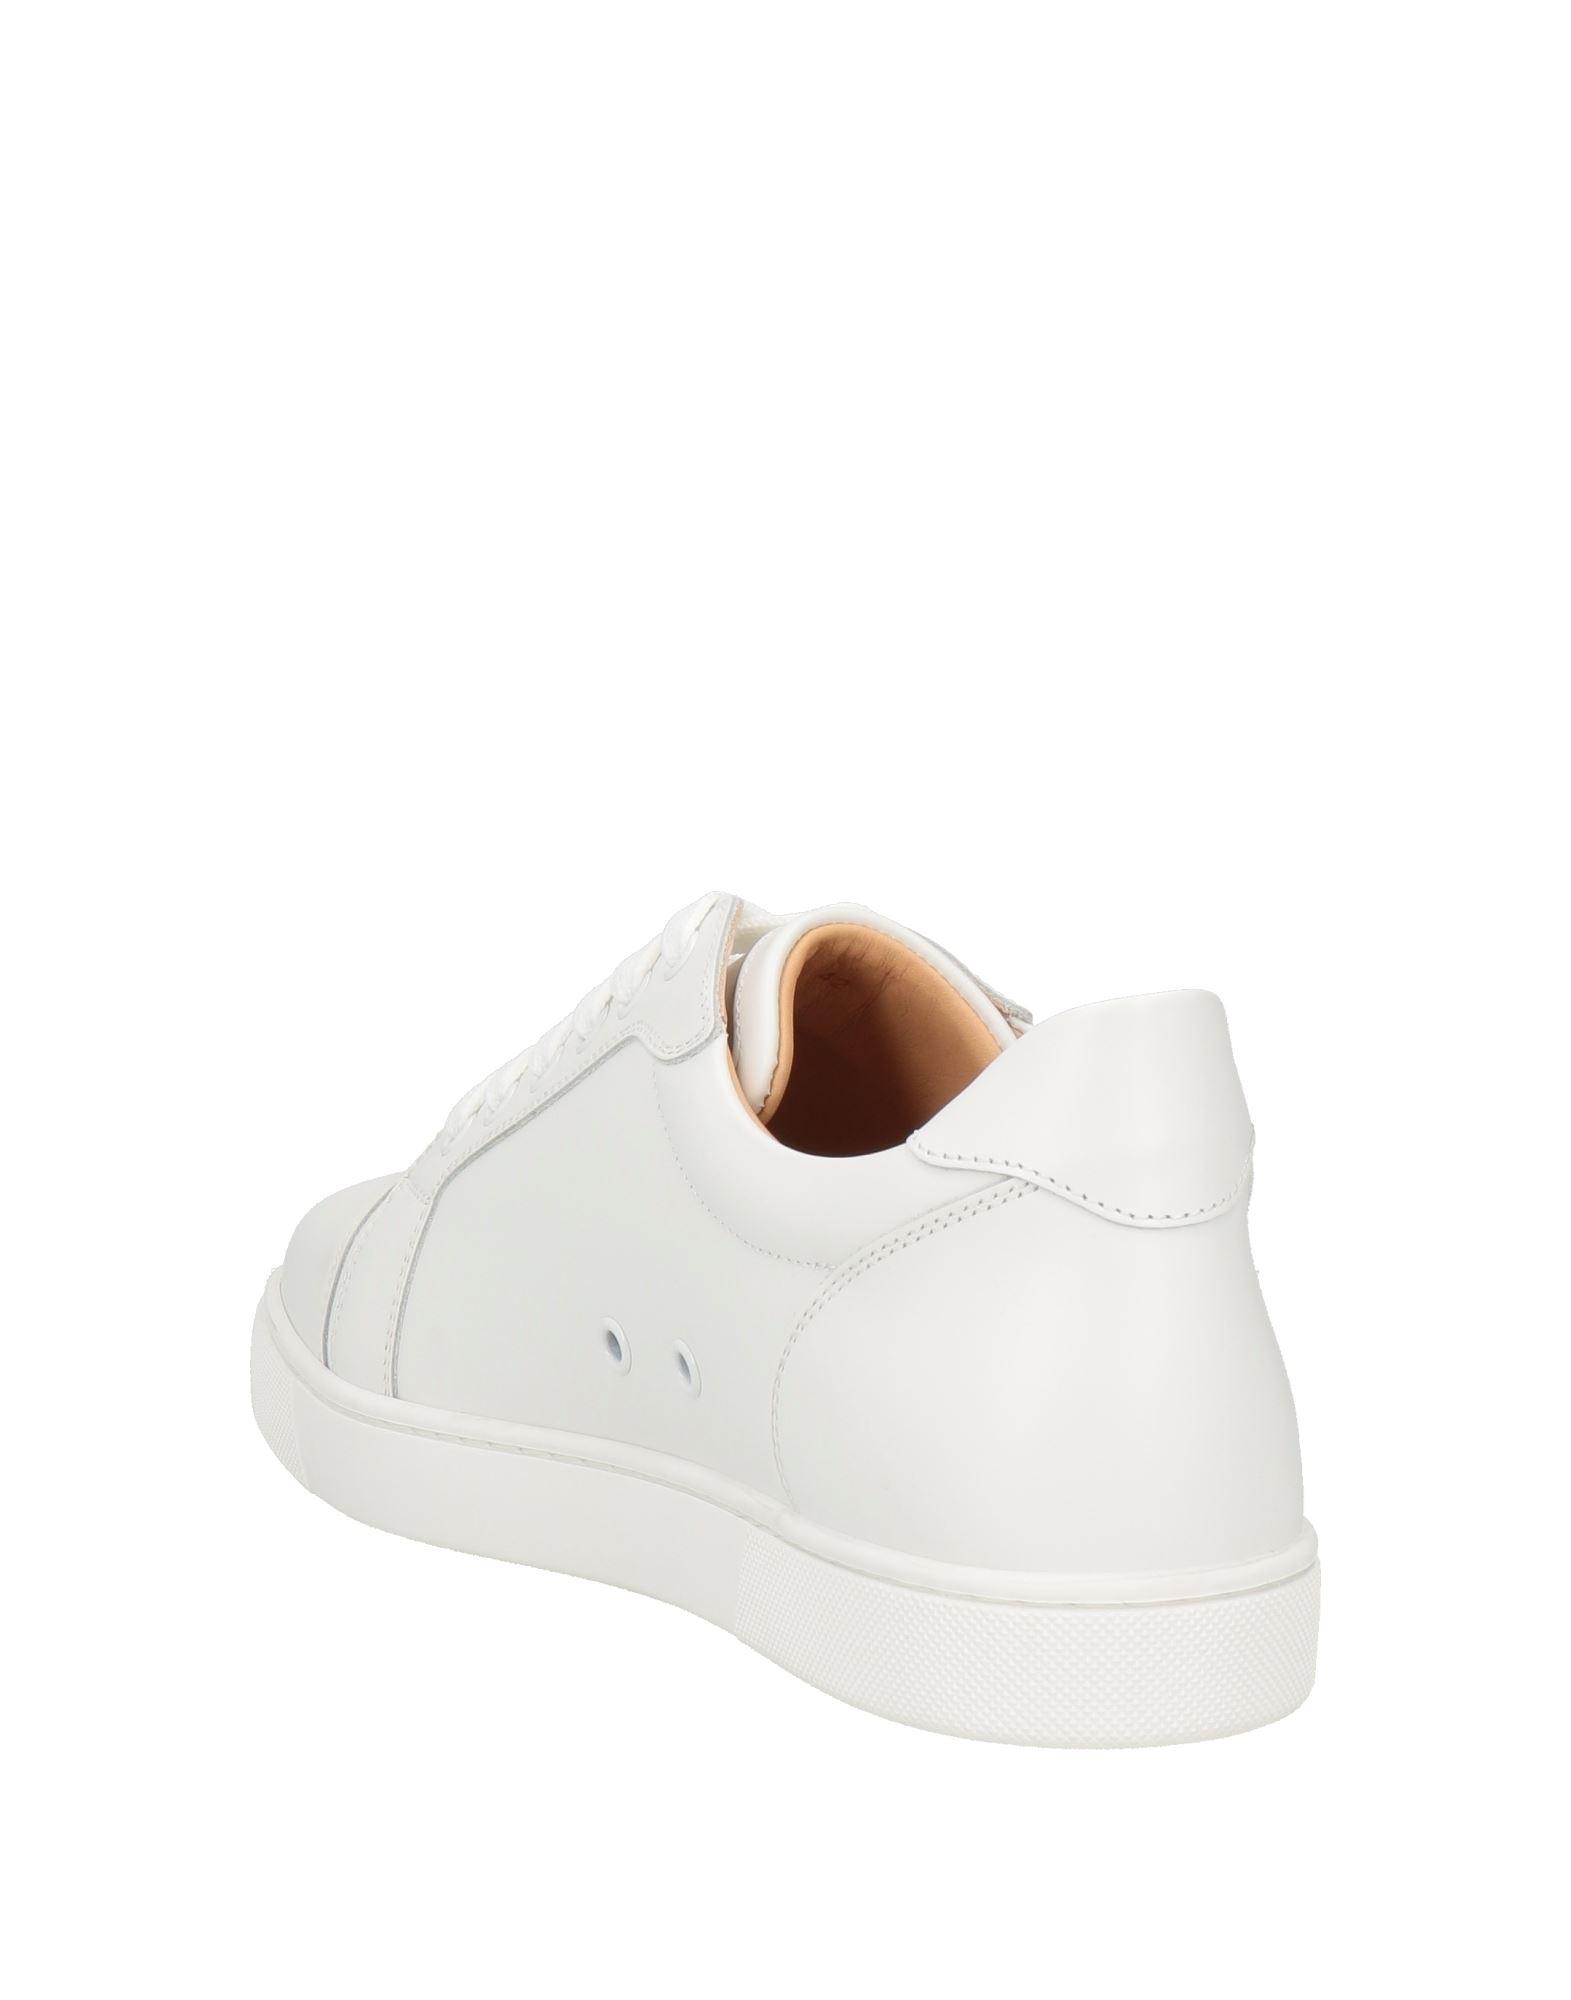 Christian Louboutin Sneakers in White | Lyst